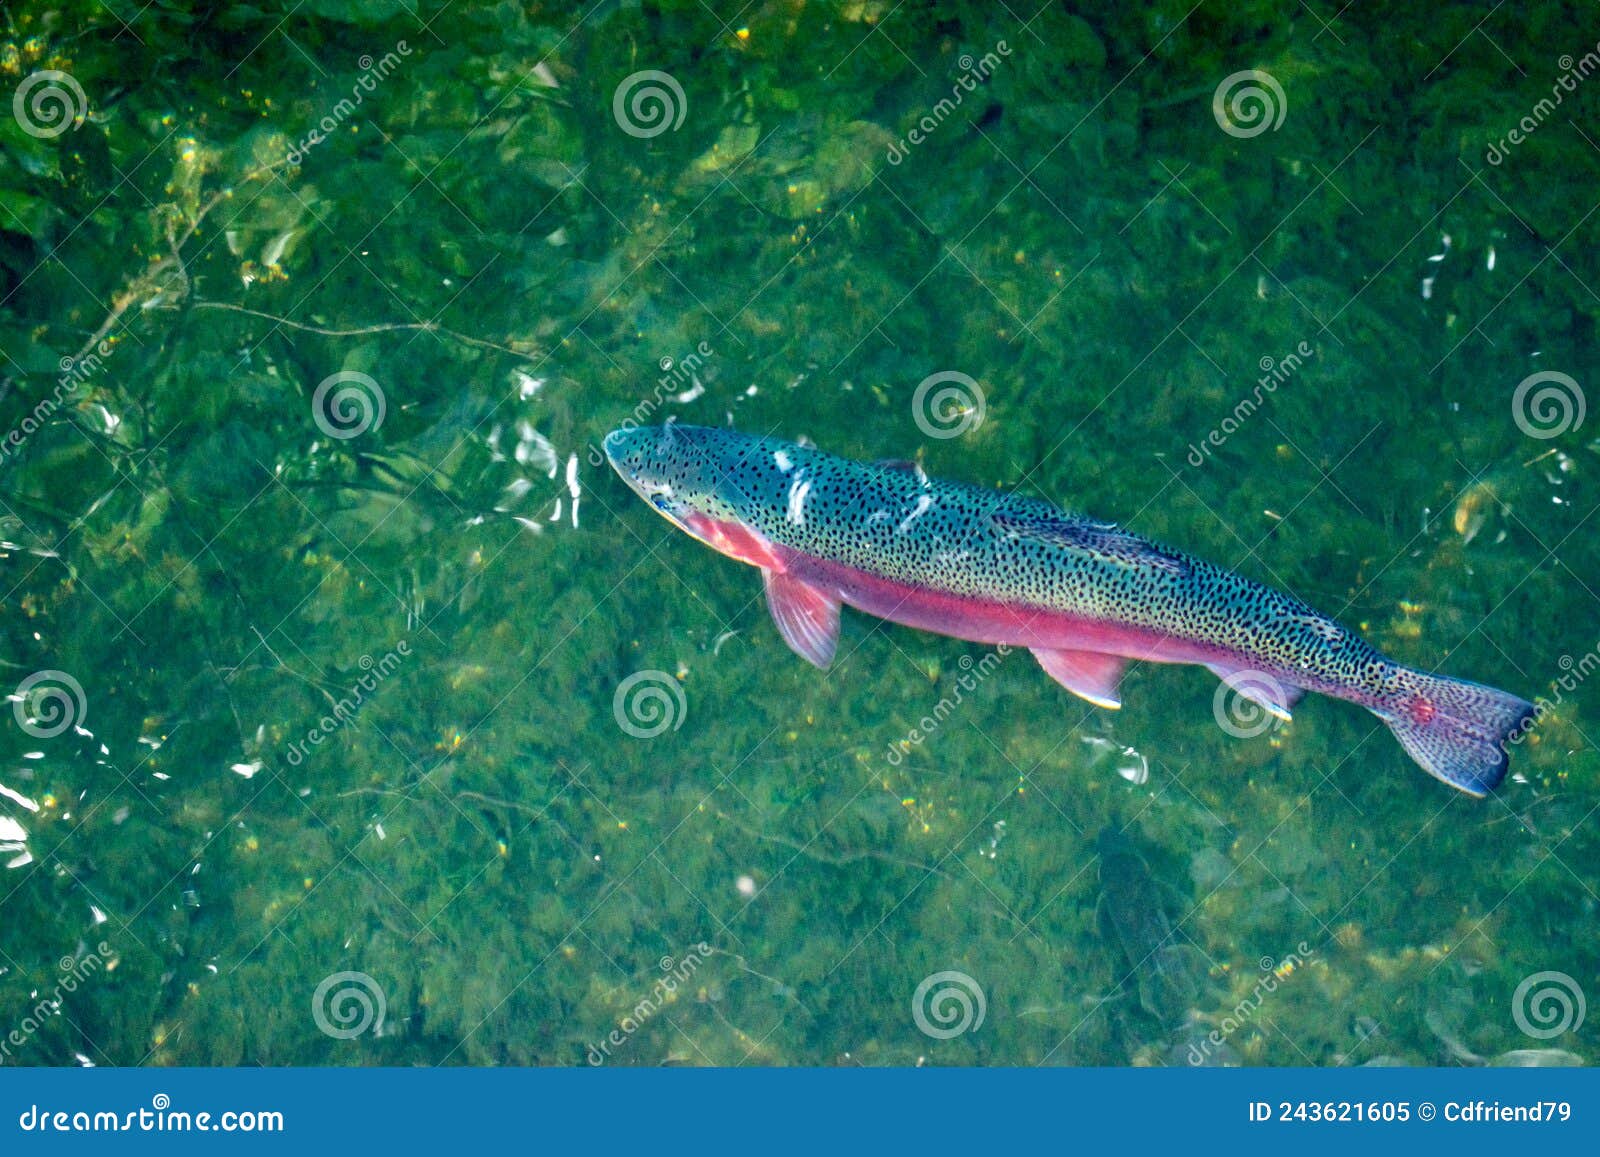 Rainbow Trout Swimming in Clear Waters Stock Image - Image of outdoors,  hobby: 243621605